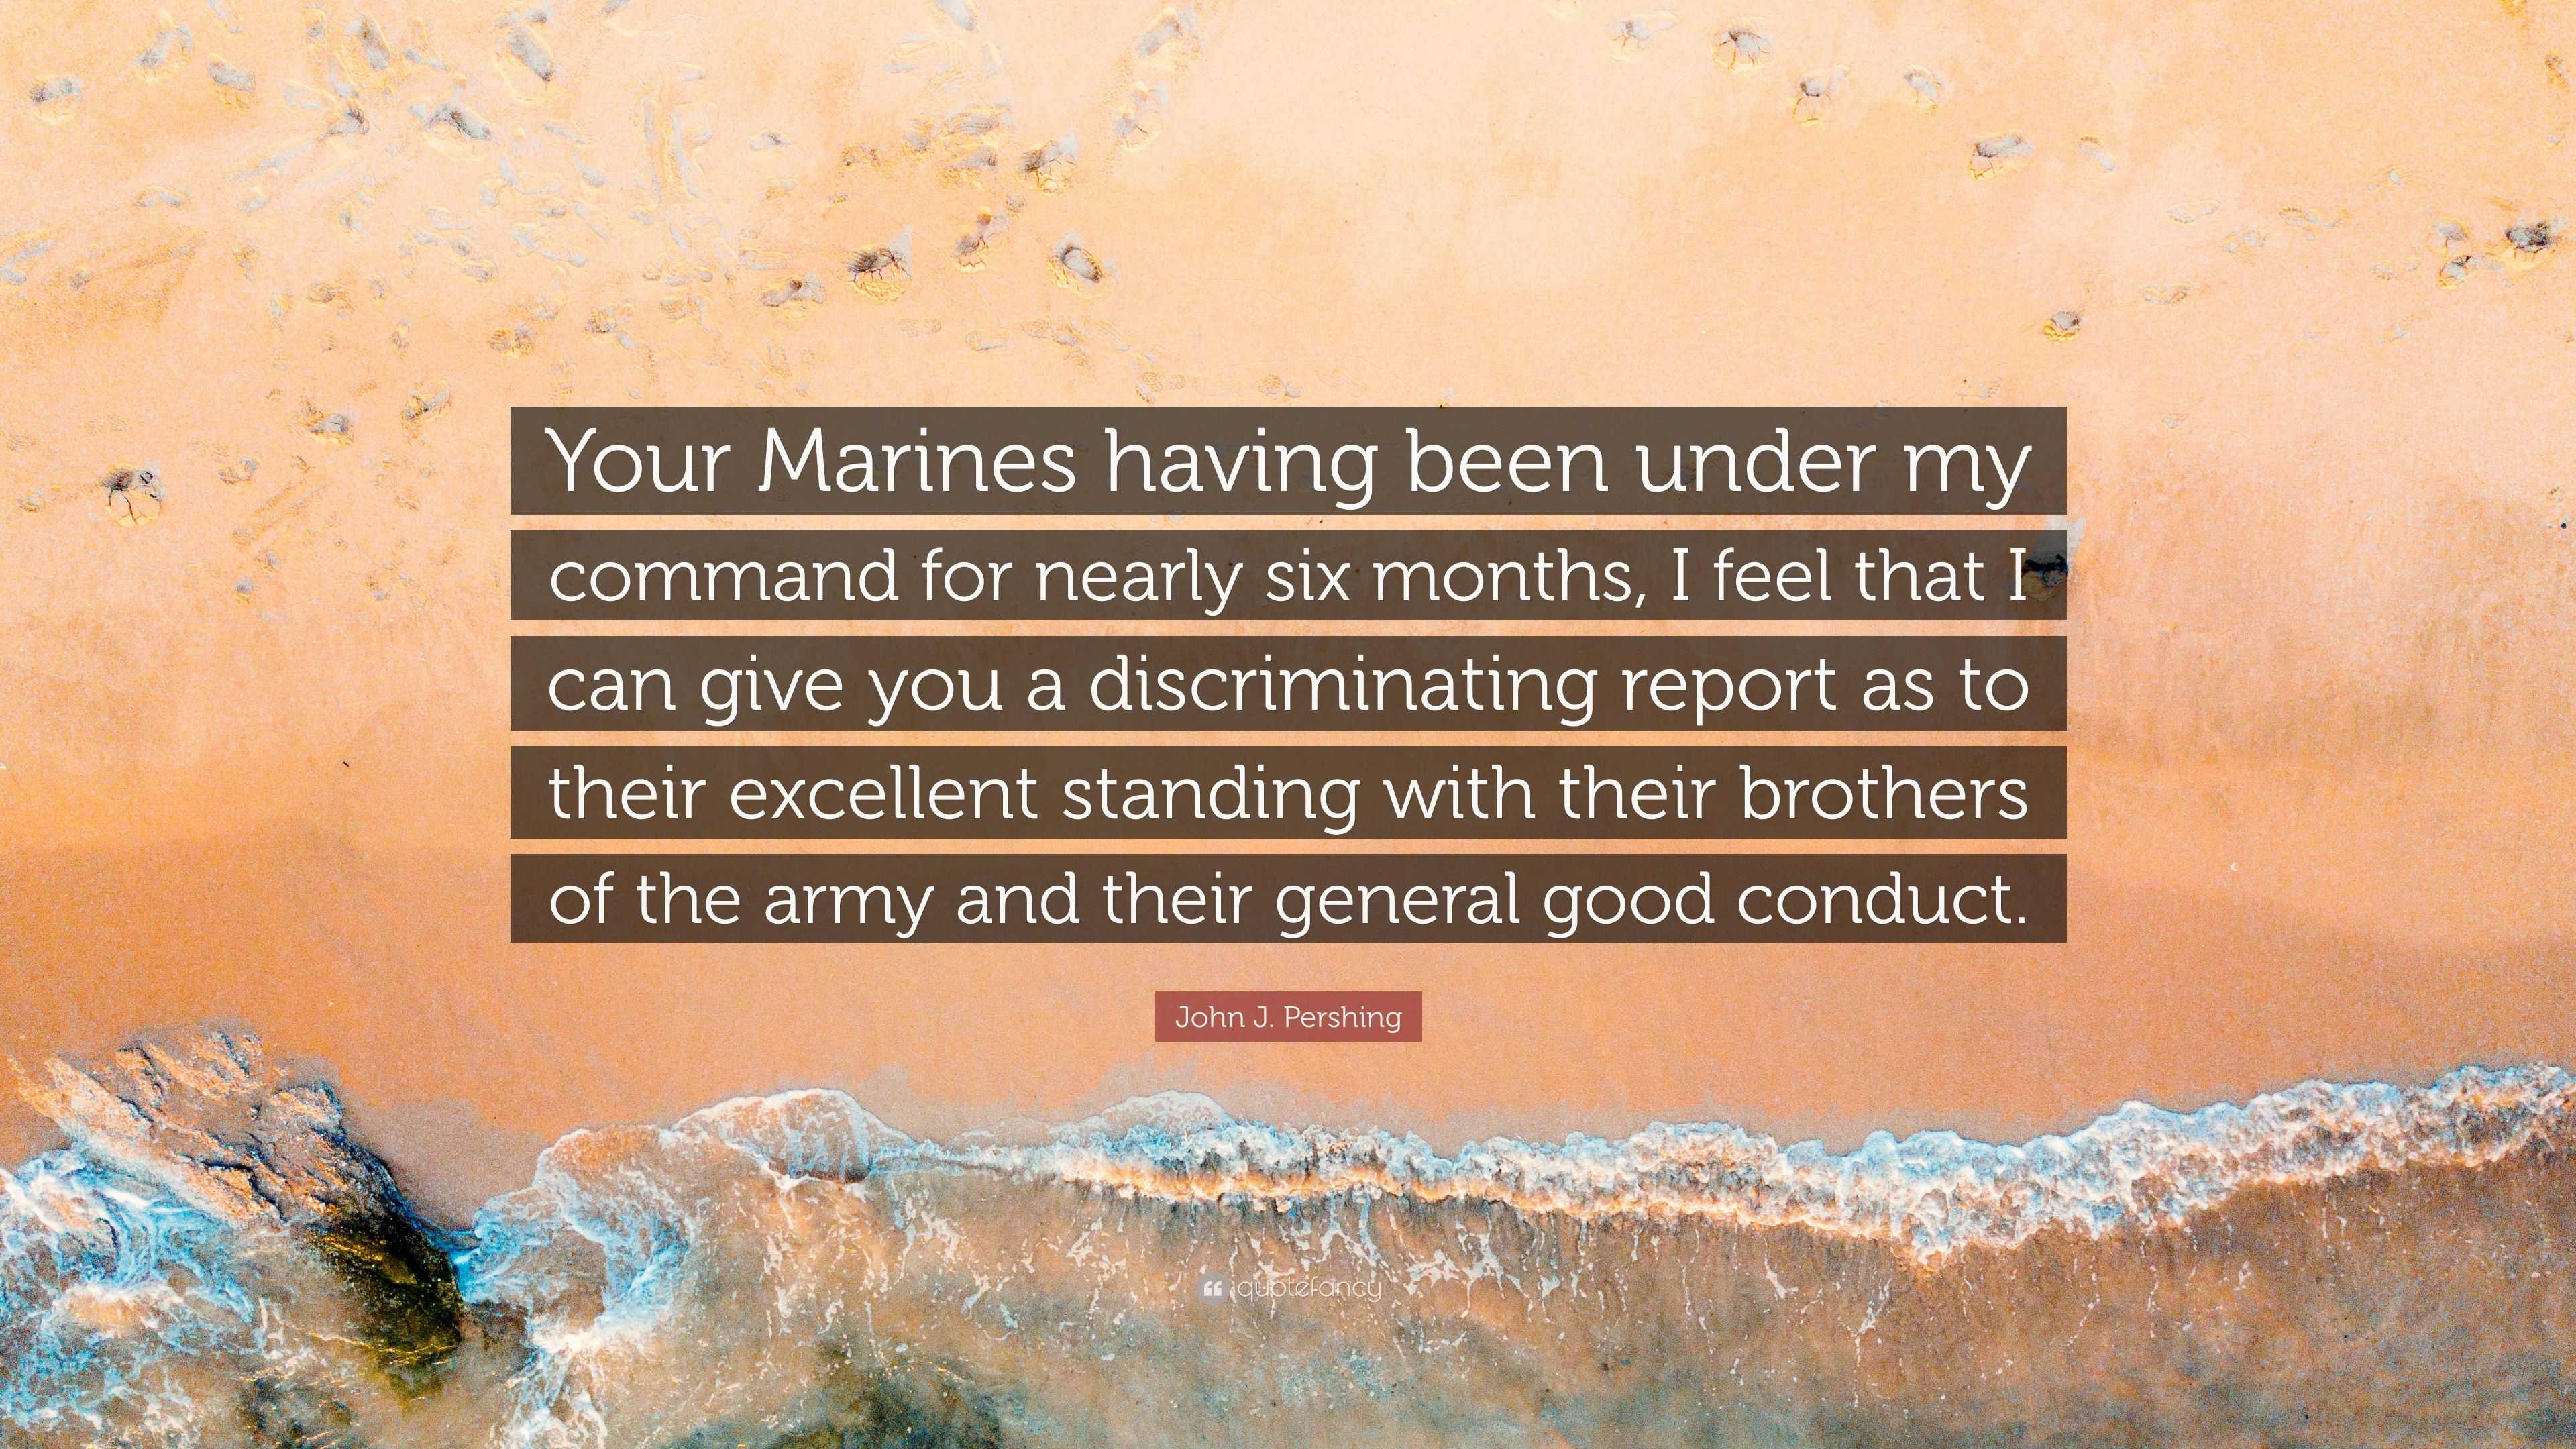 John J. Pershing Quote: “Your Marines having been under my command for